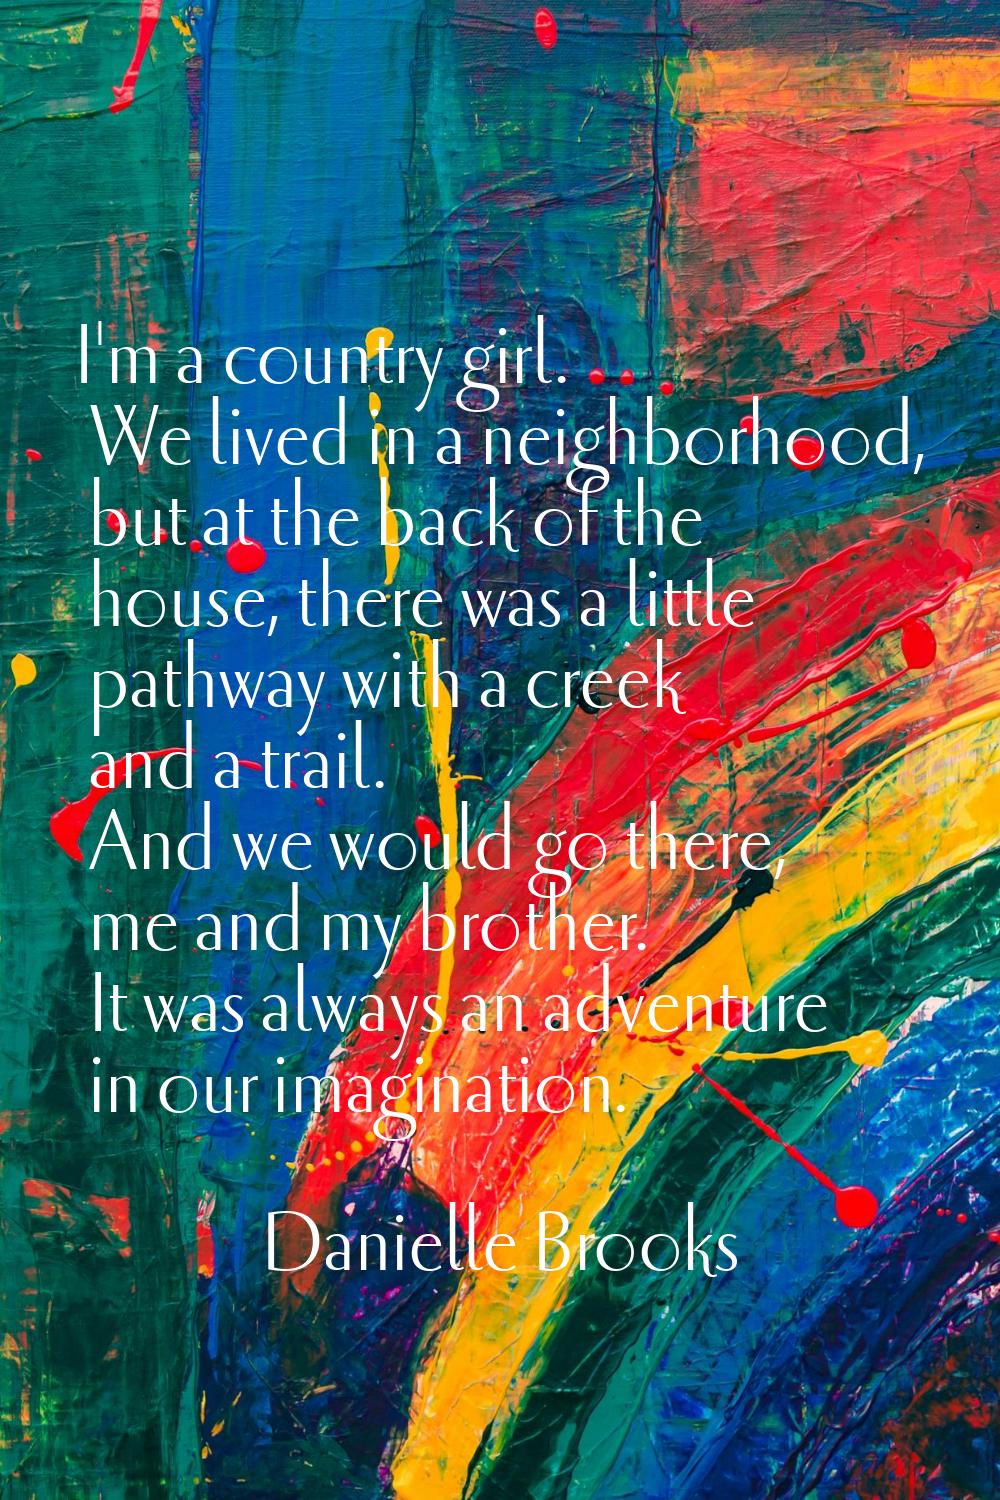 I'm a country girl. We lived in a neighborhood, but at the back of the house, there was a little pa